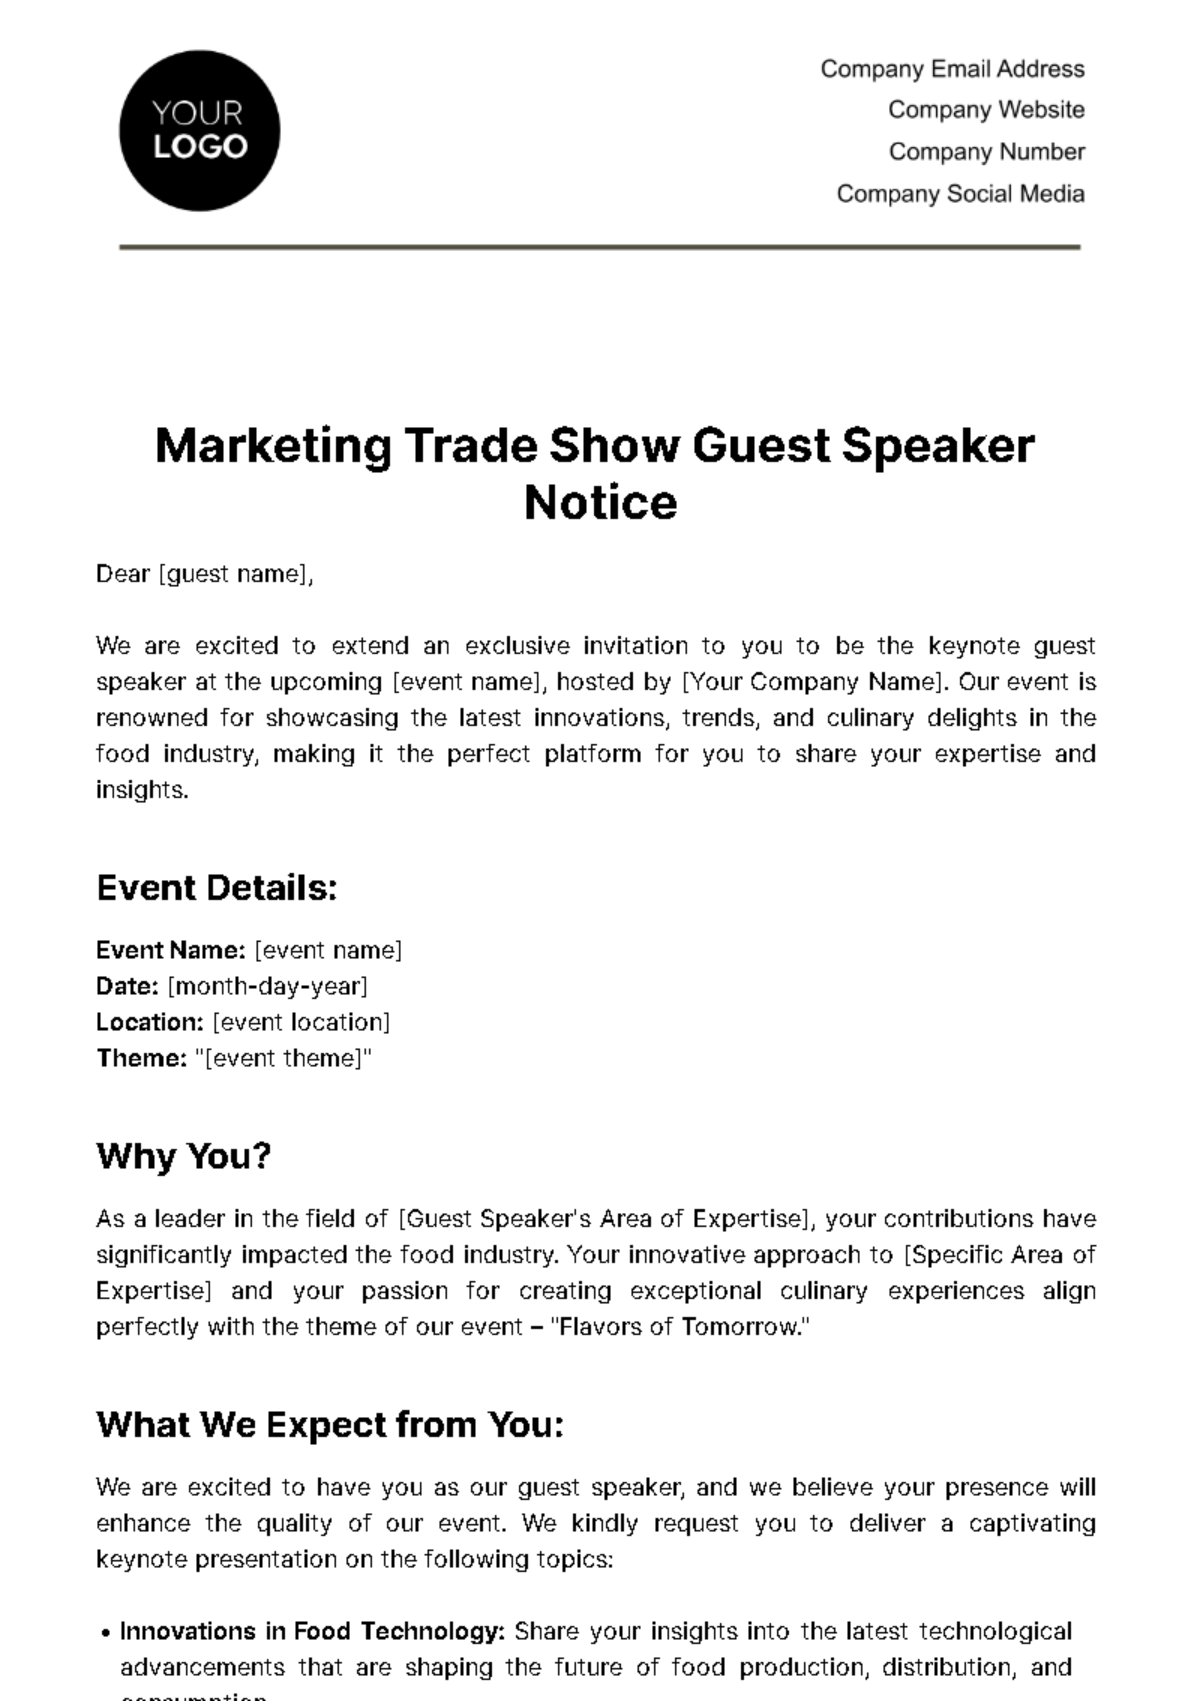 Marketing Trade Show Guest Speaker Notice Template